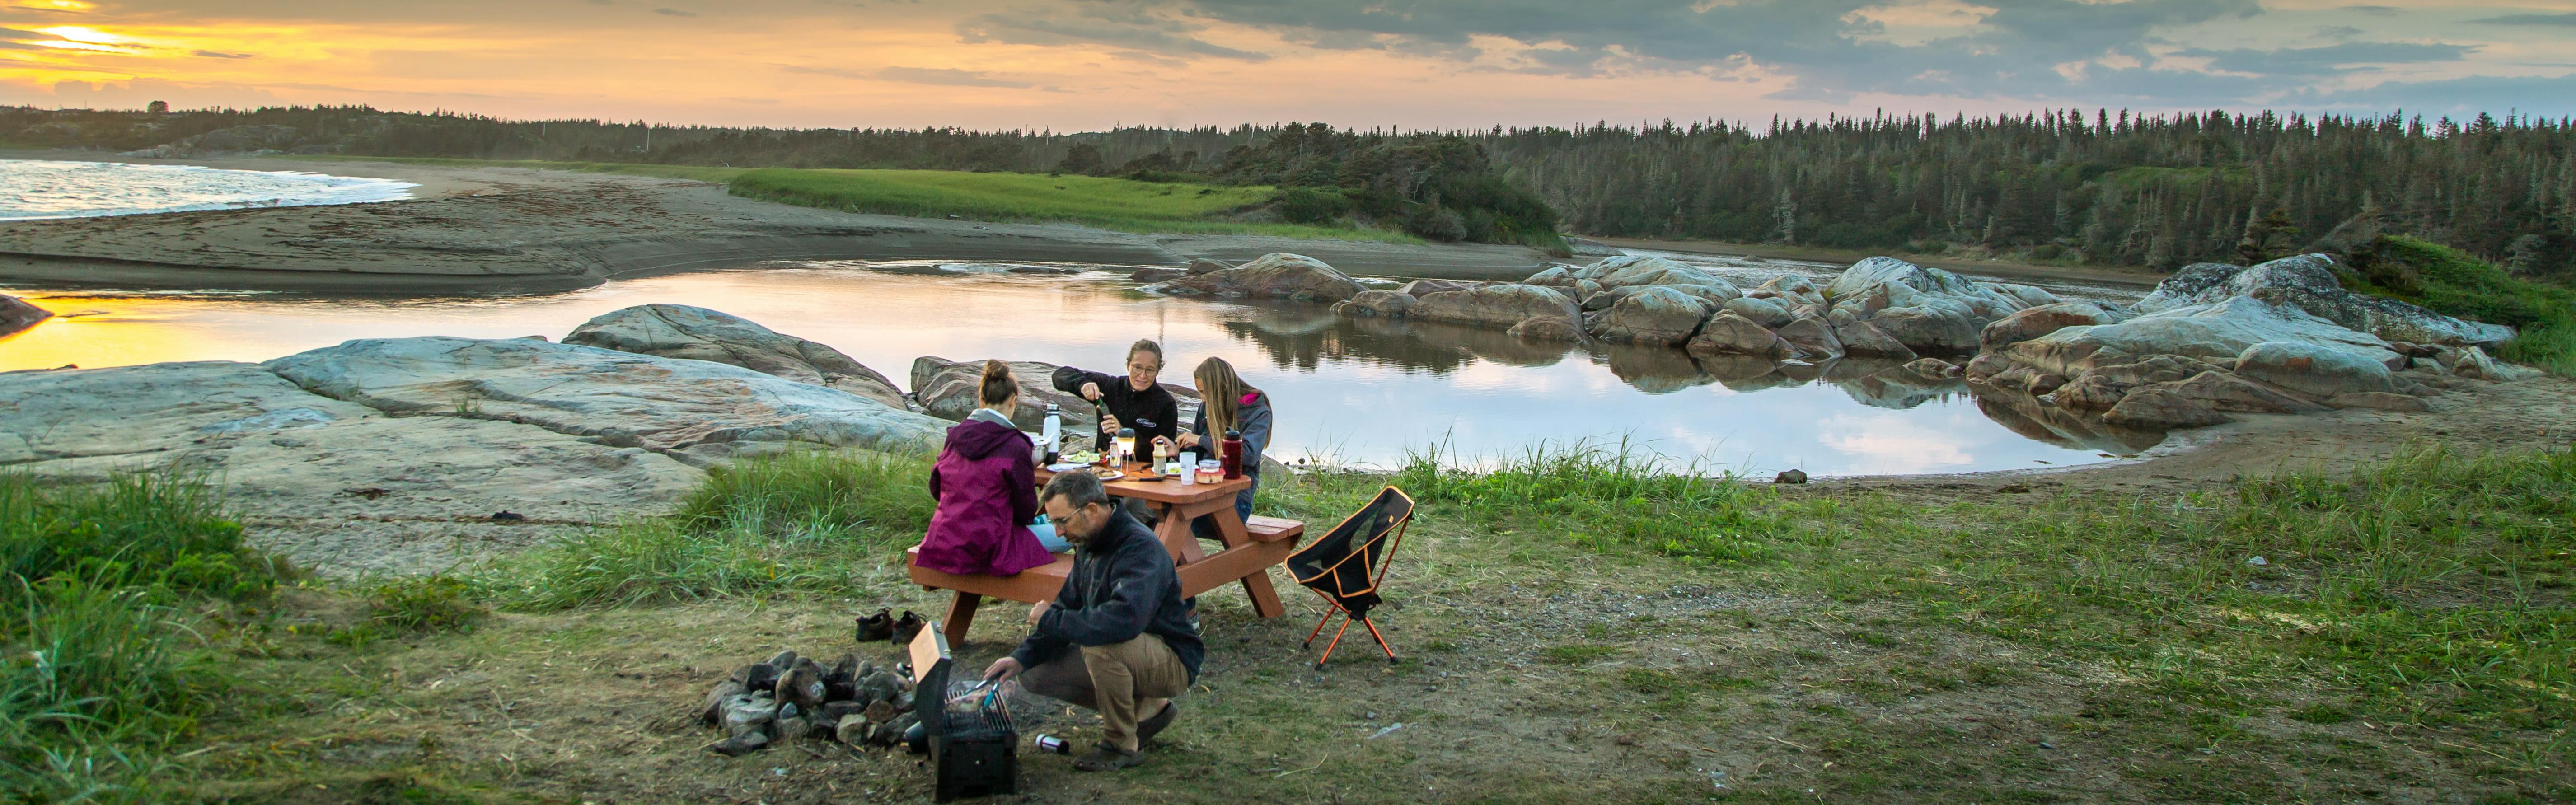 A family sits at a lake-side picnic table at sunset and shares a meal.